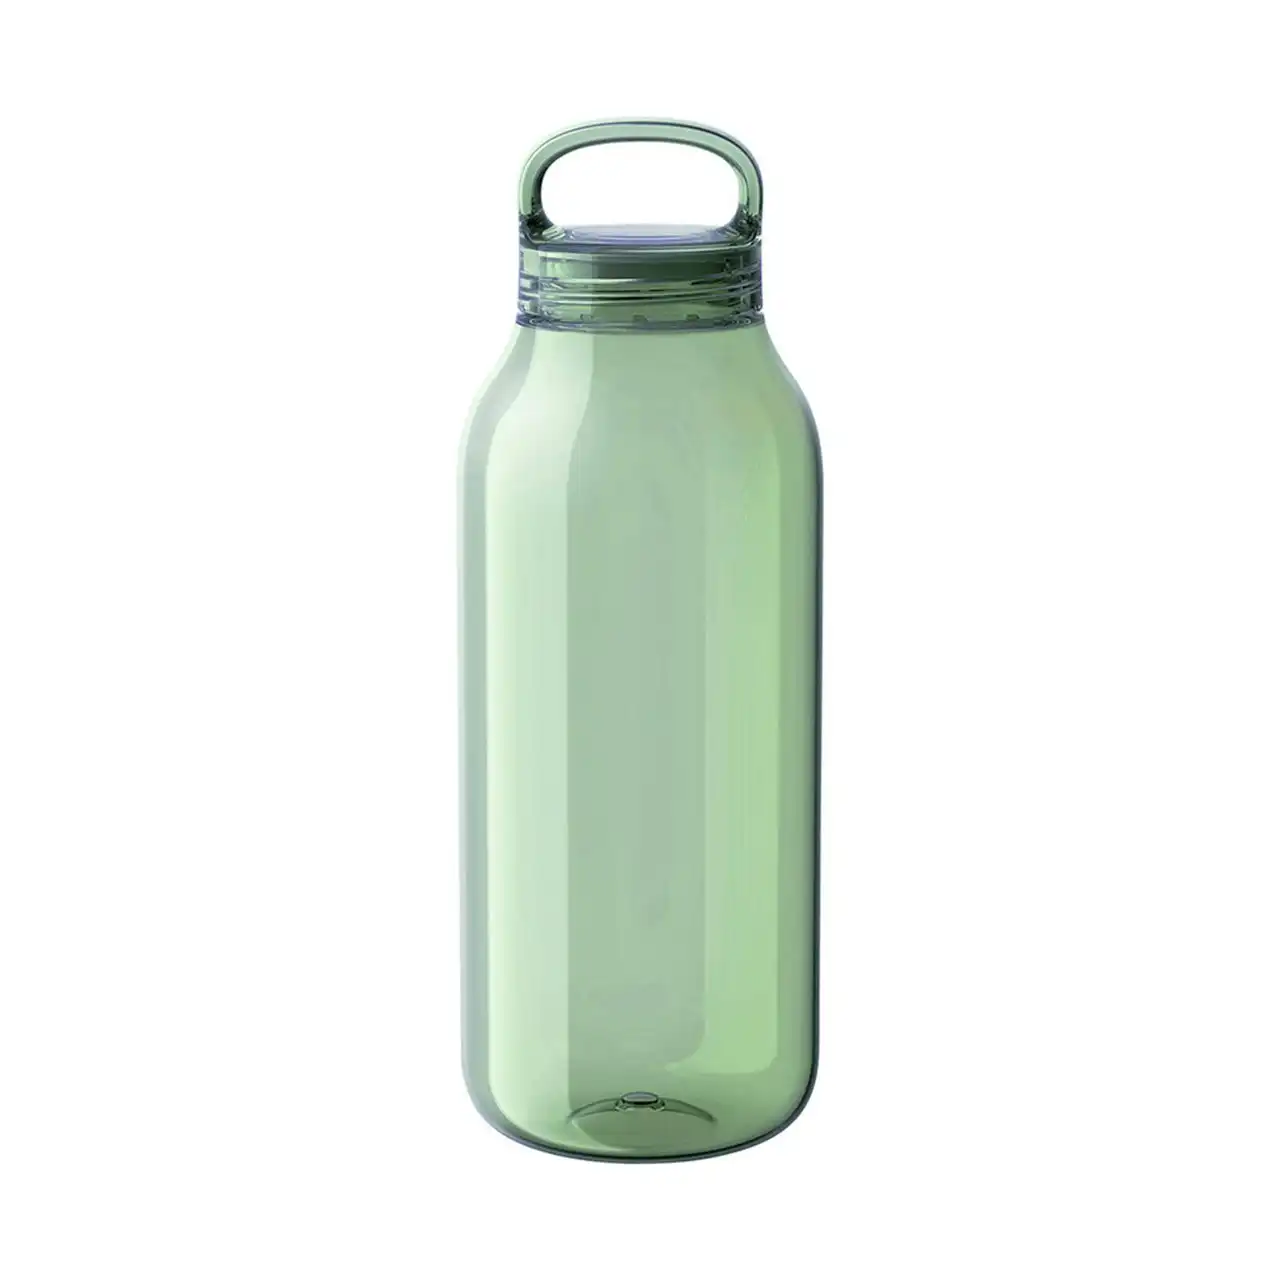 Kinto 500ml Water Bottle Travel Drinking Container w/ Twist Lid/Handle Green